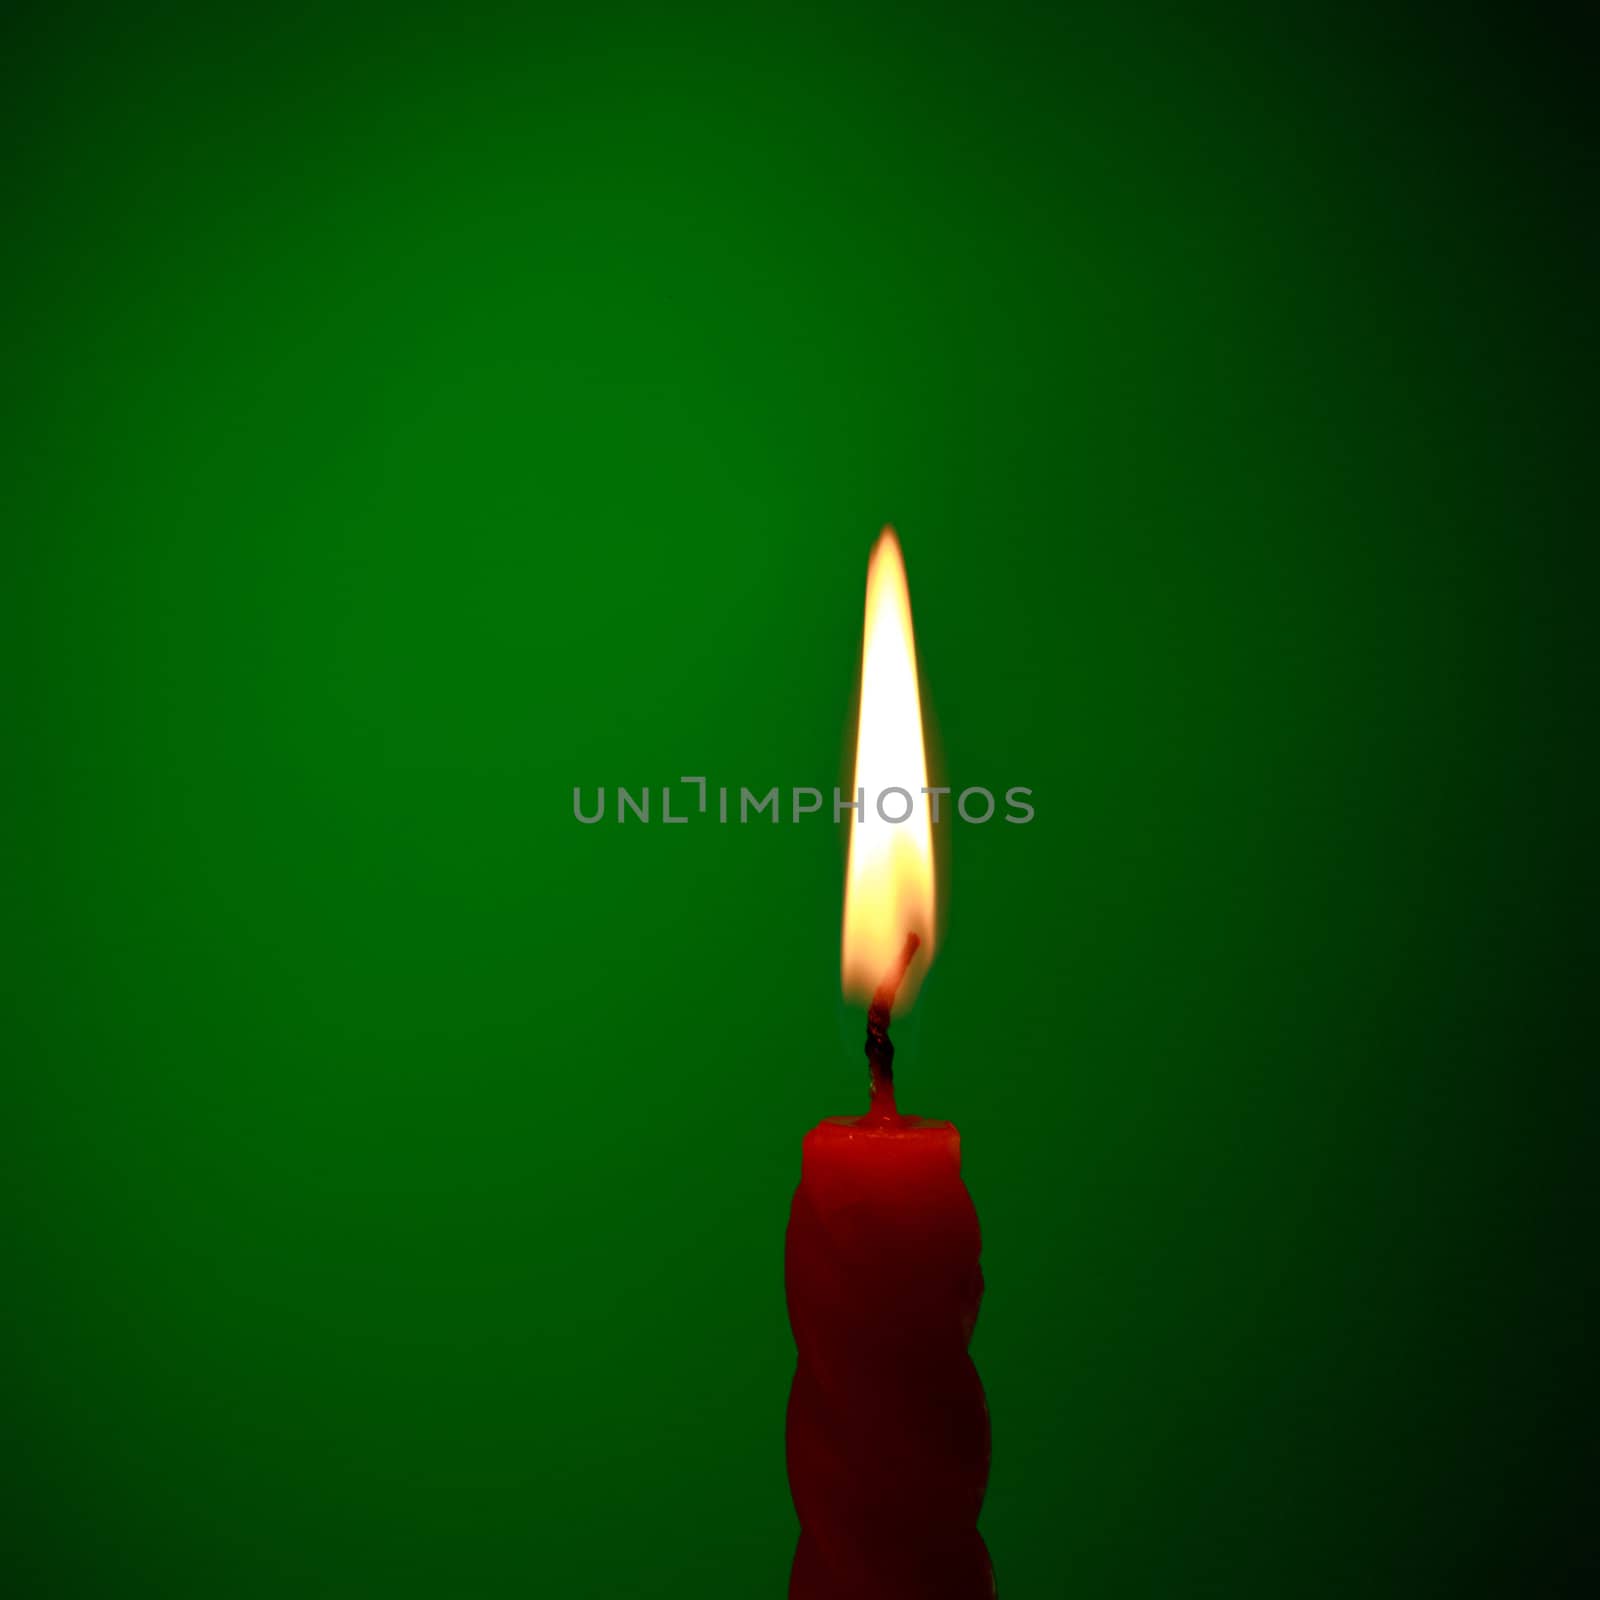 Candle On Green by petr_malyshev